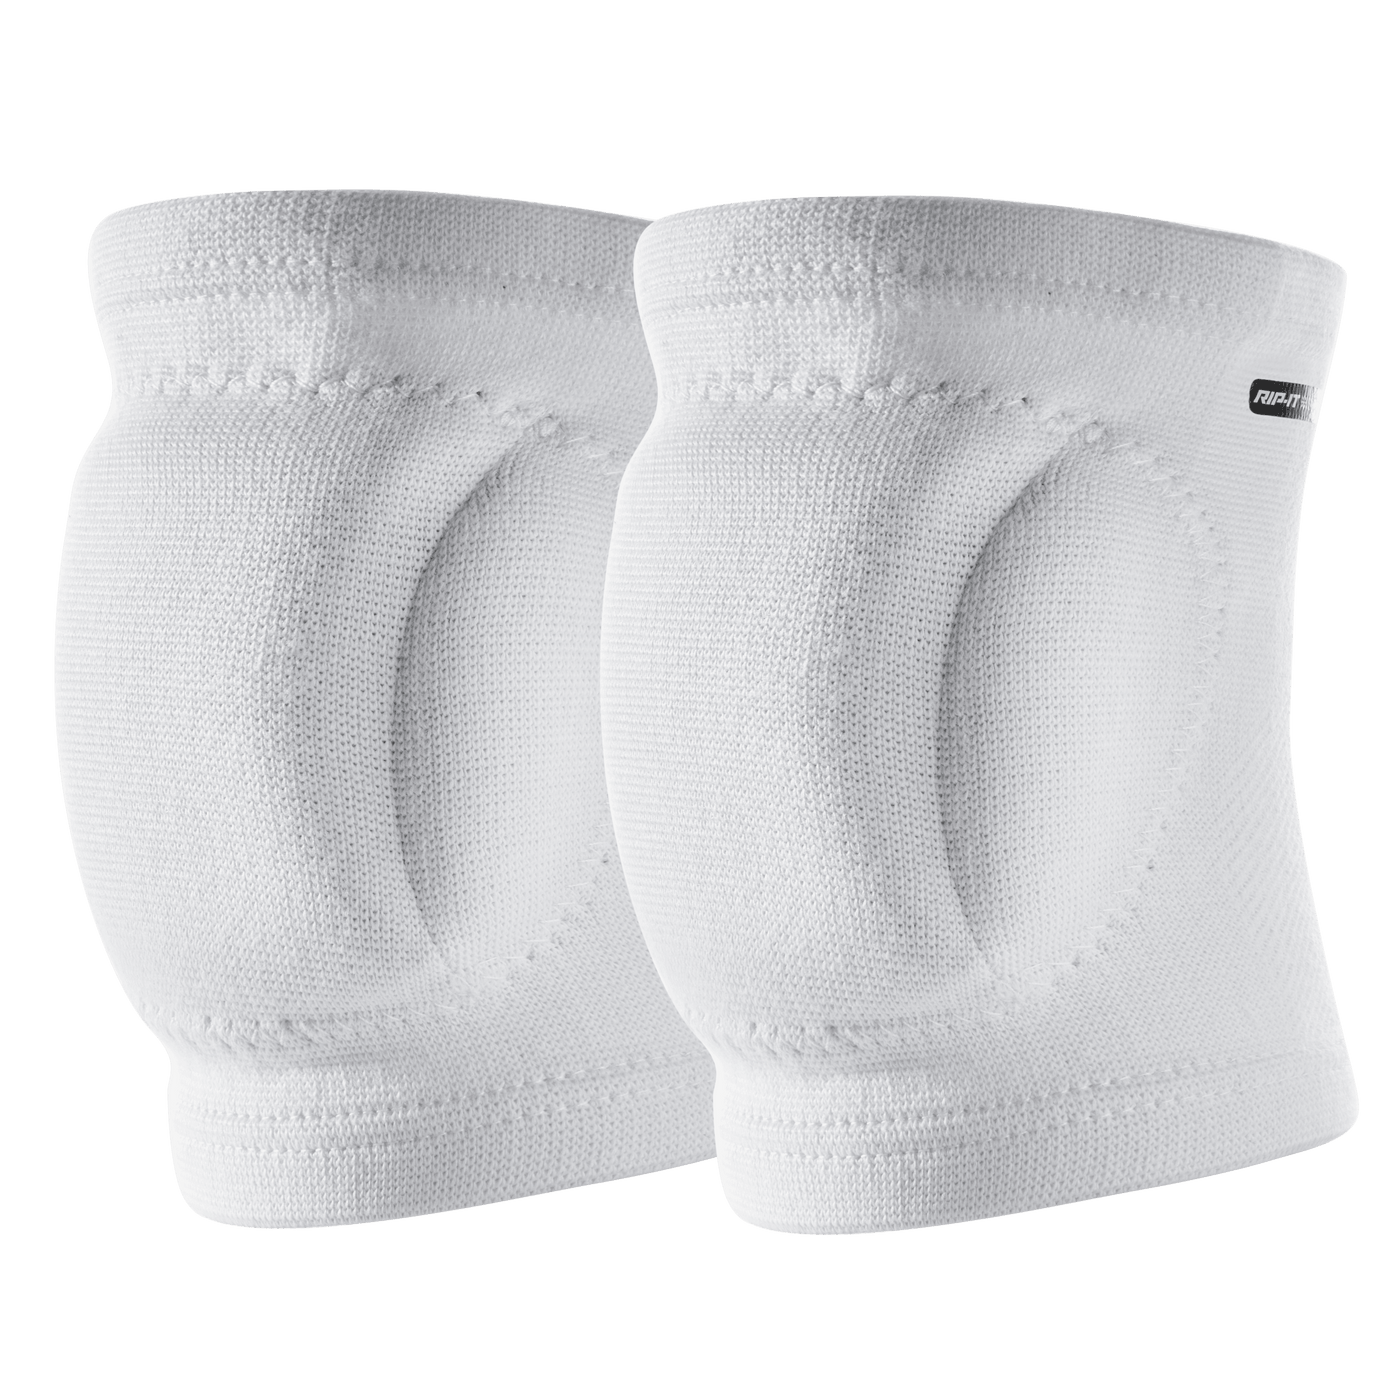 Women's Perfect Fit Volleyball Knee Pads - RIP-IT Sports